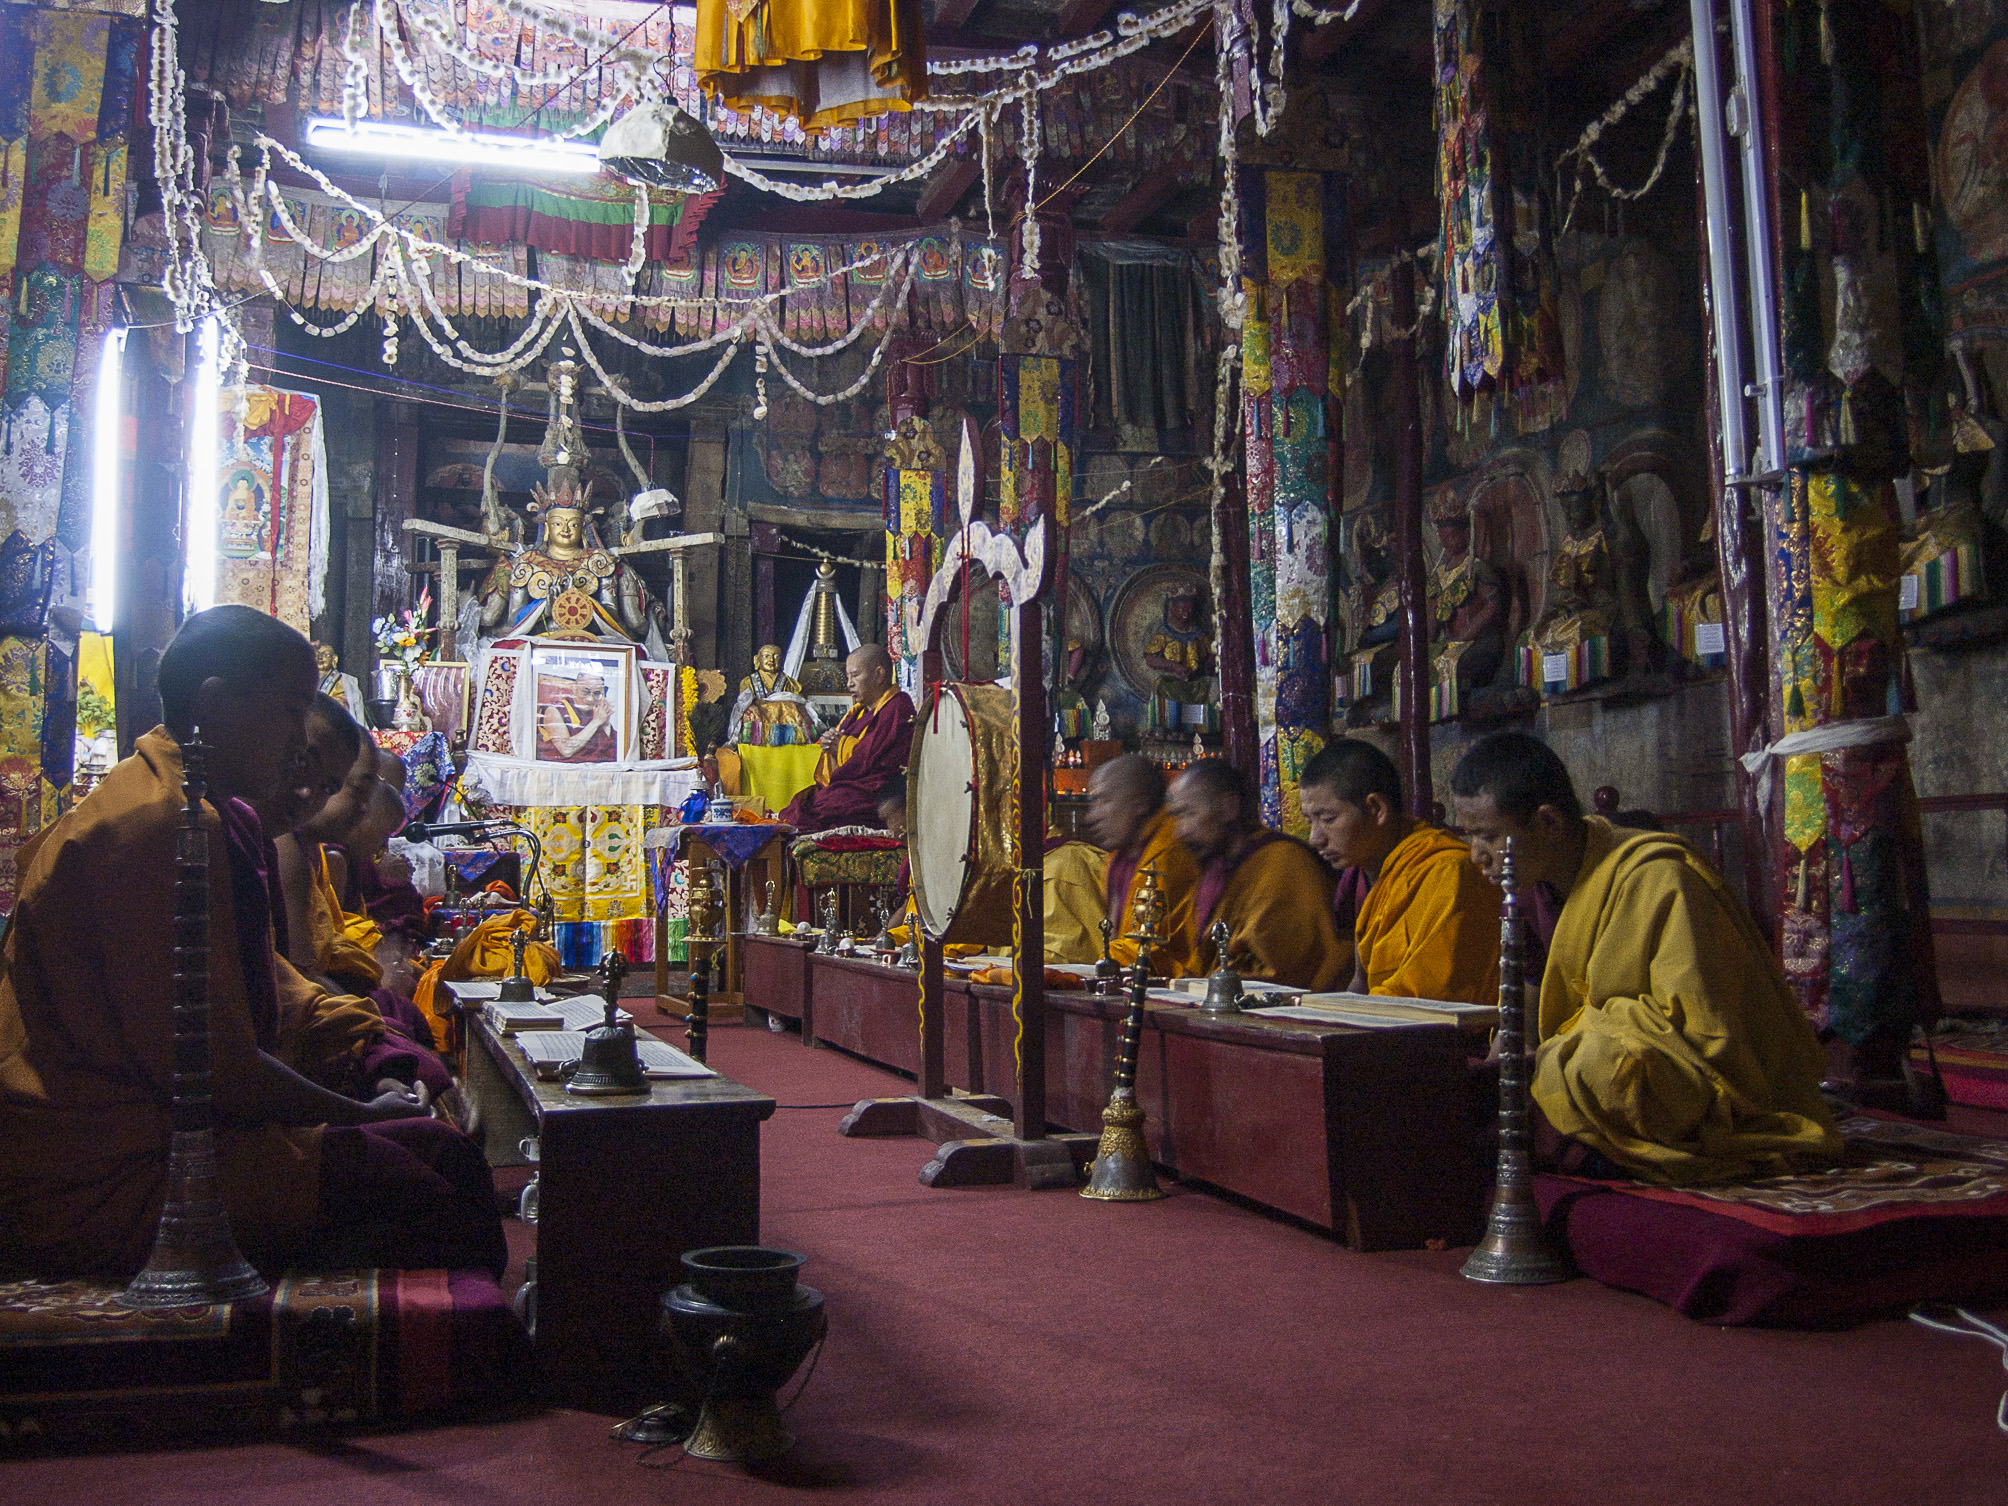 Monks sit in two rows facing one another behind short tables in hall featuring Buddha statue, banners, and decoration